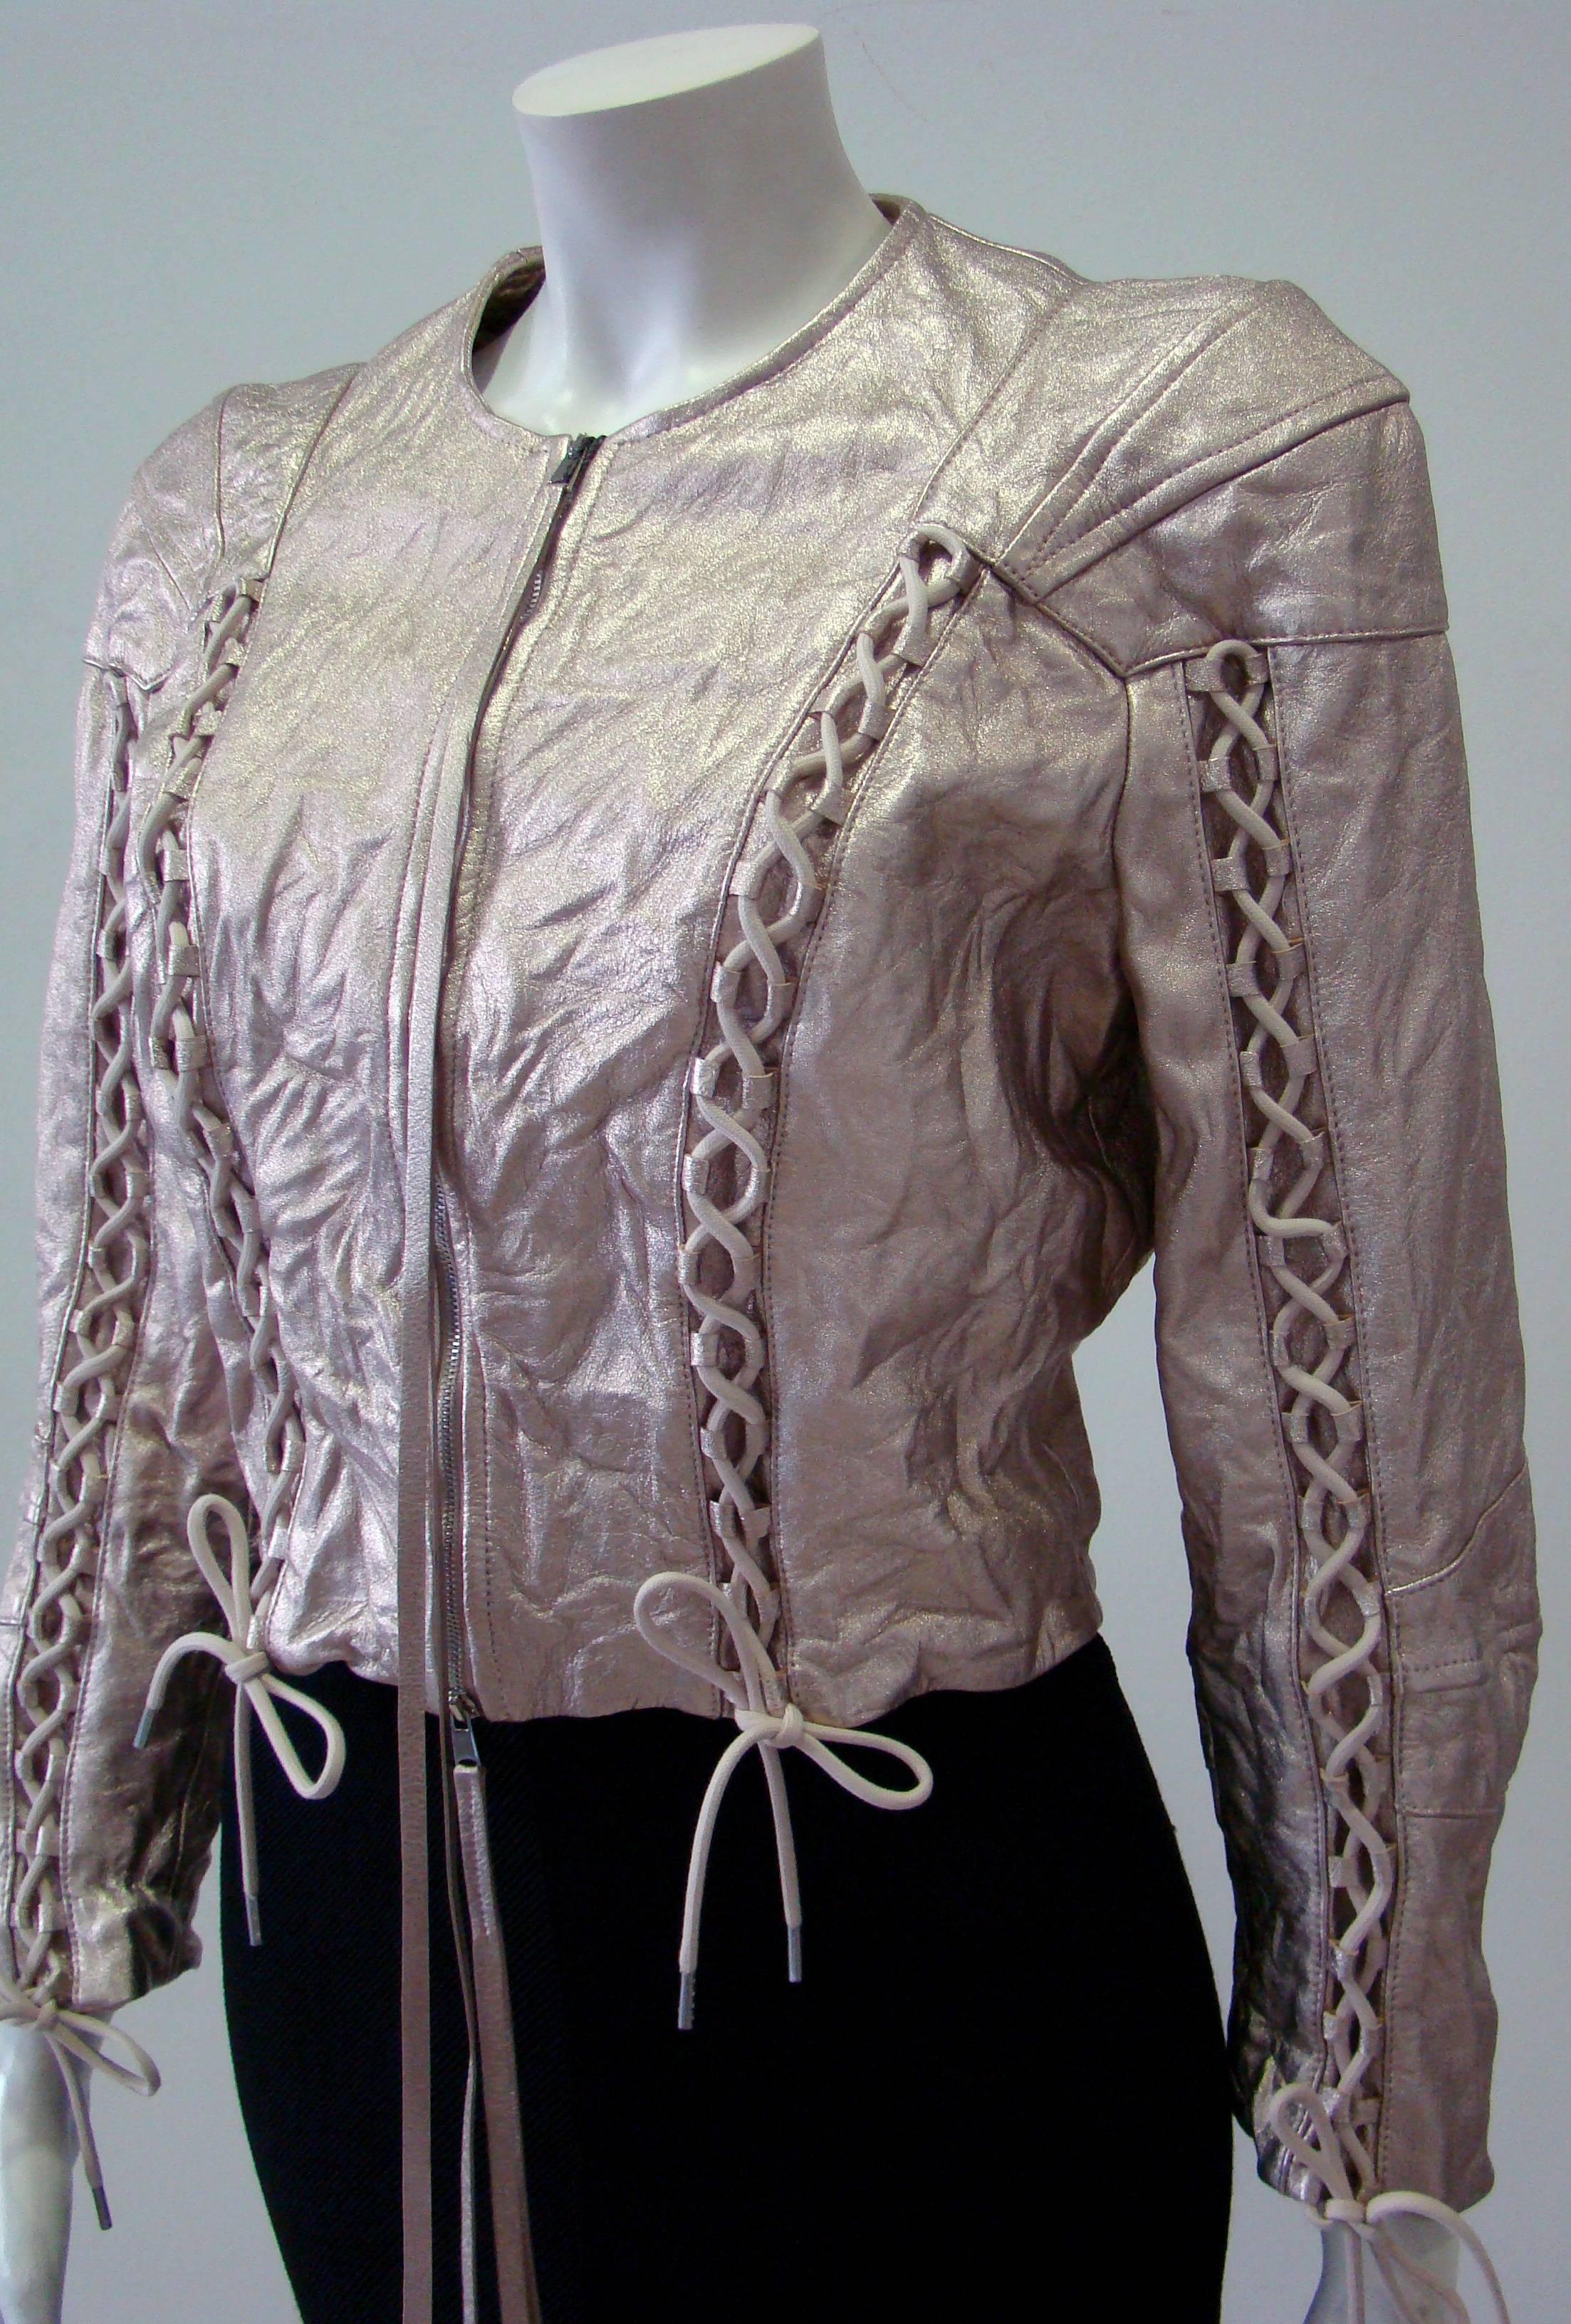 Alexander McQueen Wrinkled Short Leather Jacket In Excellent Condition For Sale In Athens, Agia Paraskevi